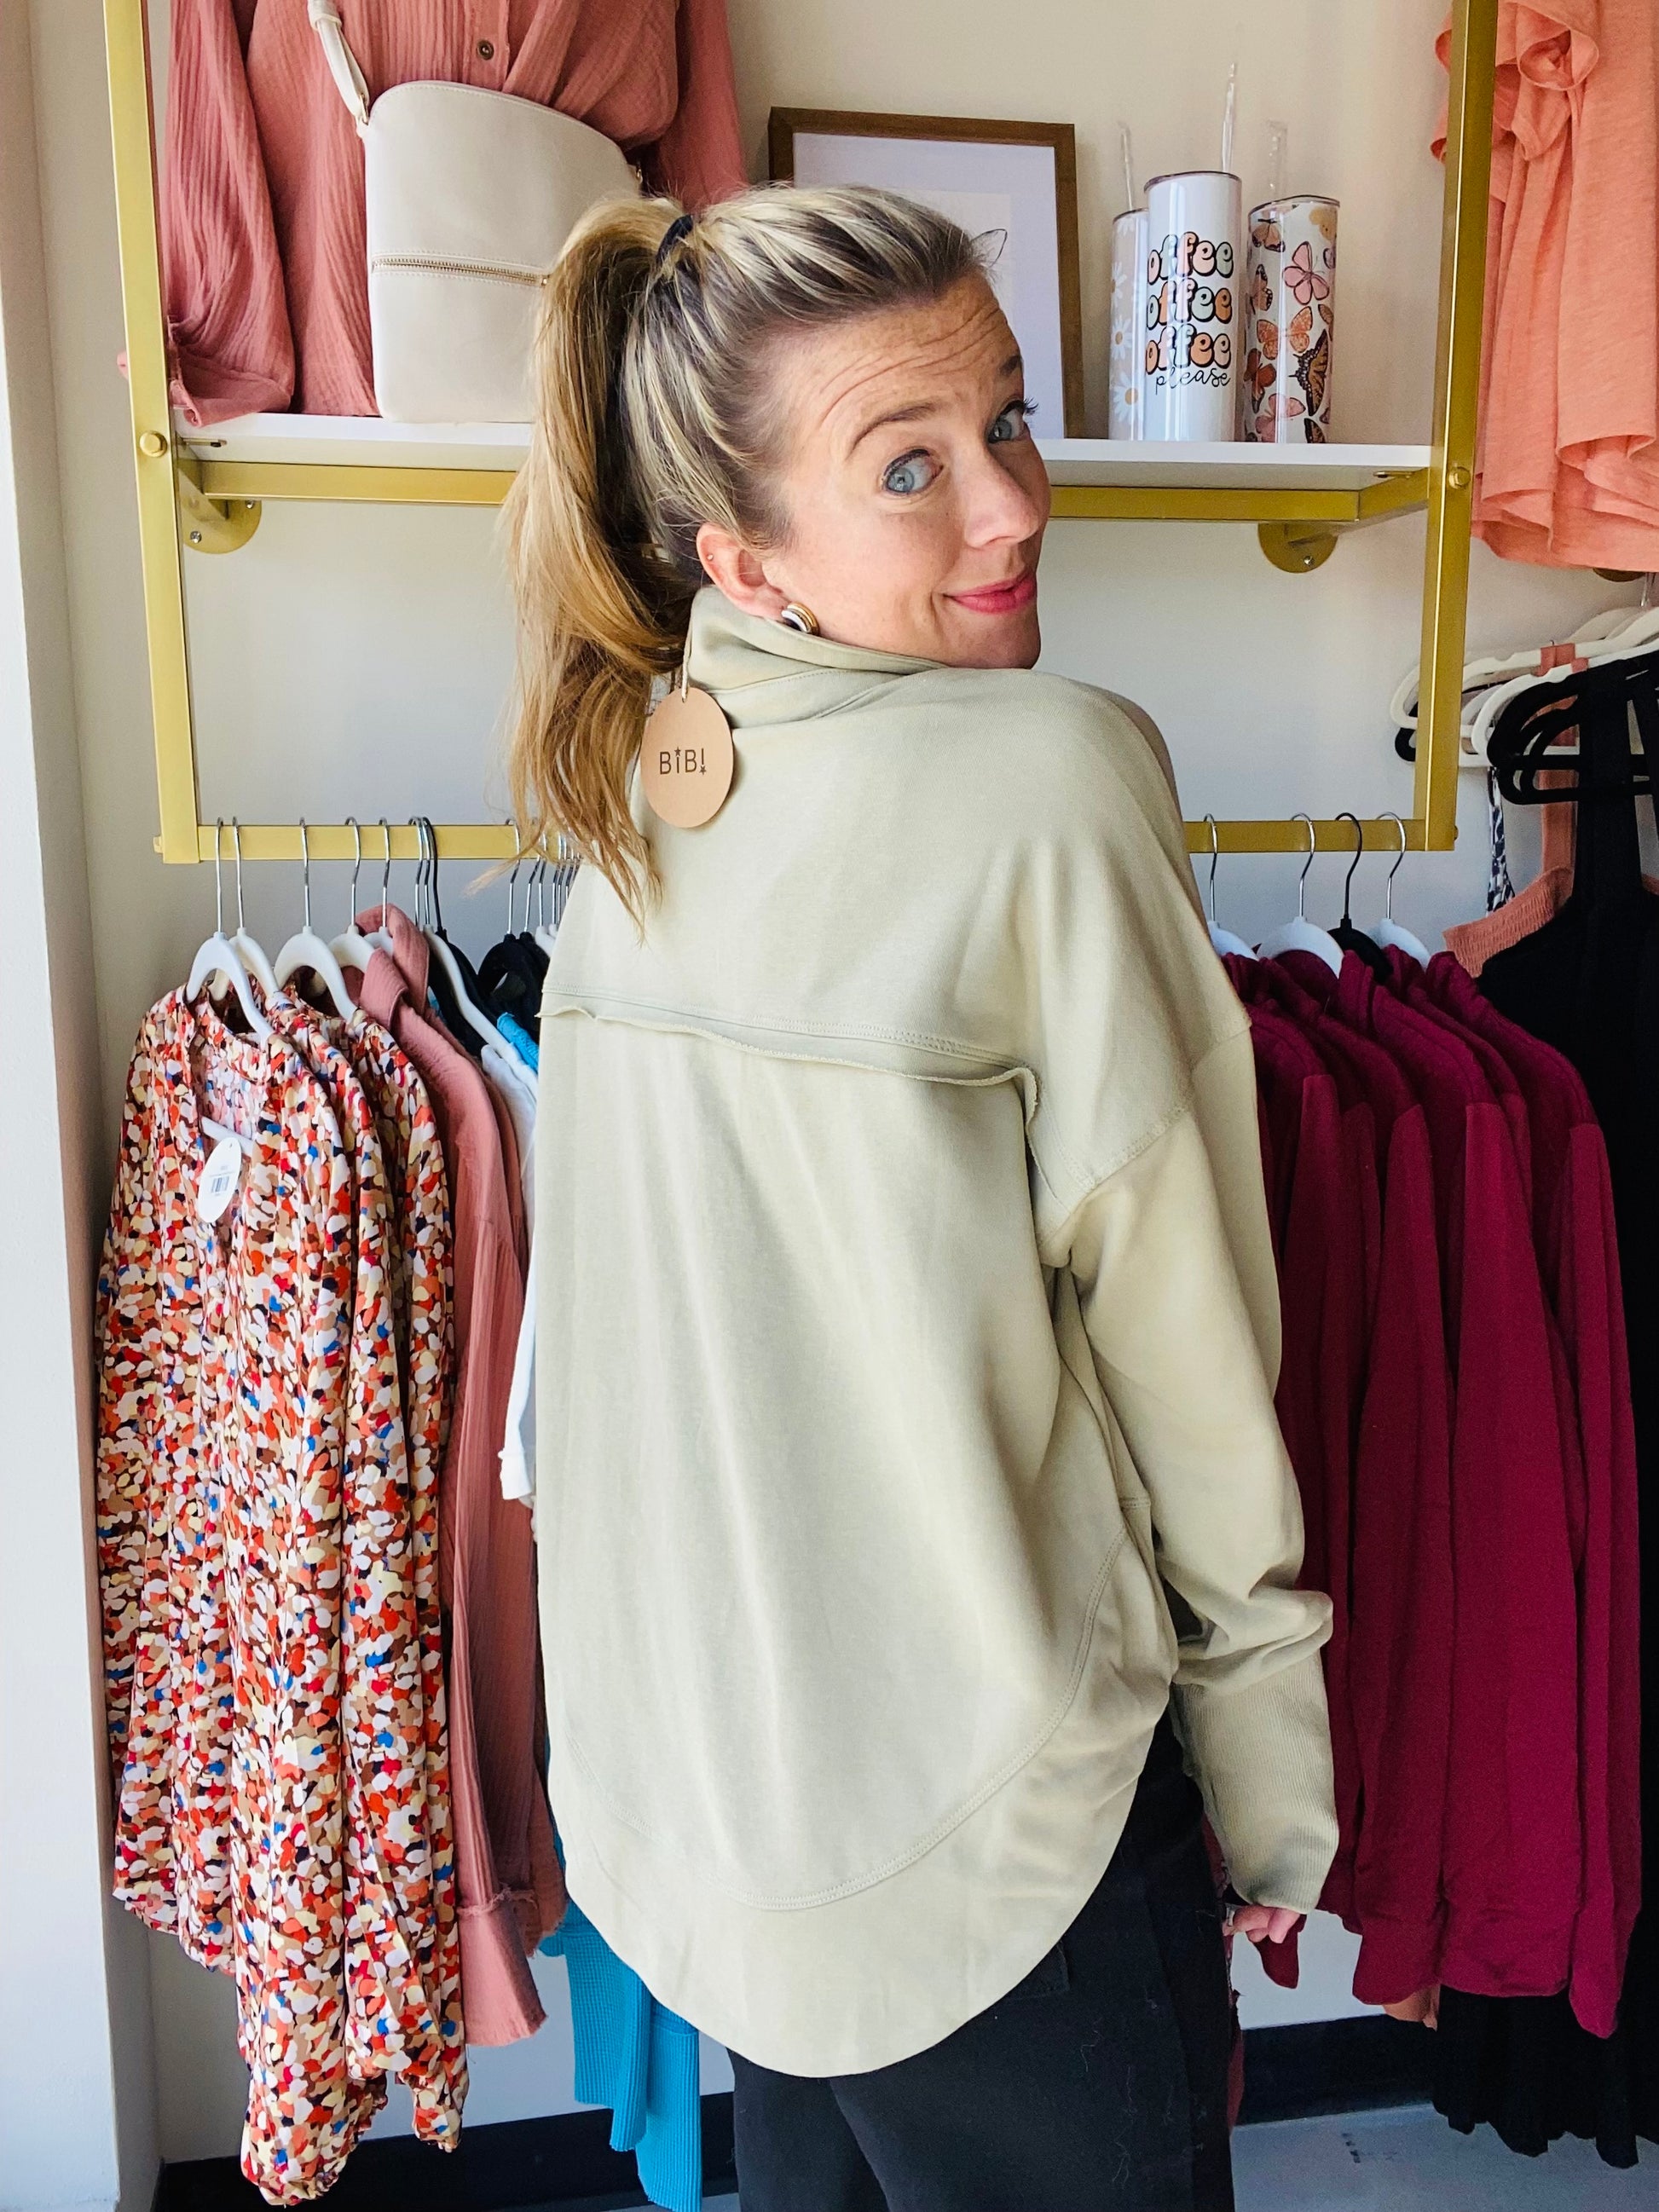 Experience comfort and style with this Ash Green Deep V Cuff Pullover. It has a vintage wash finish to give you an effortless look paired with a unique ring detail for a subtle touch of style. Its versatile design allows you to pair it with yoga pants or jeans, making it perfect for both laid-back and casual.  Bibi Brand 